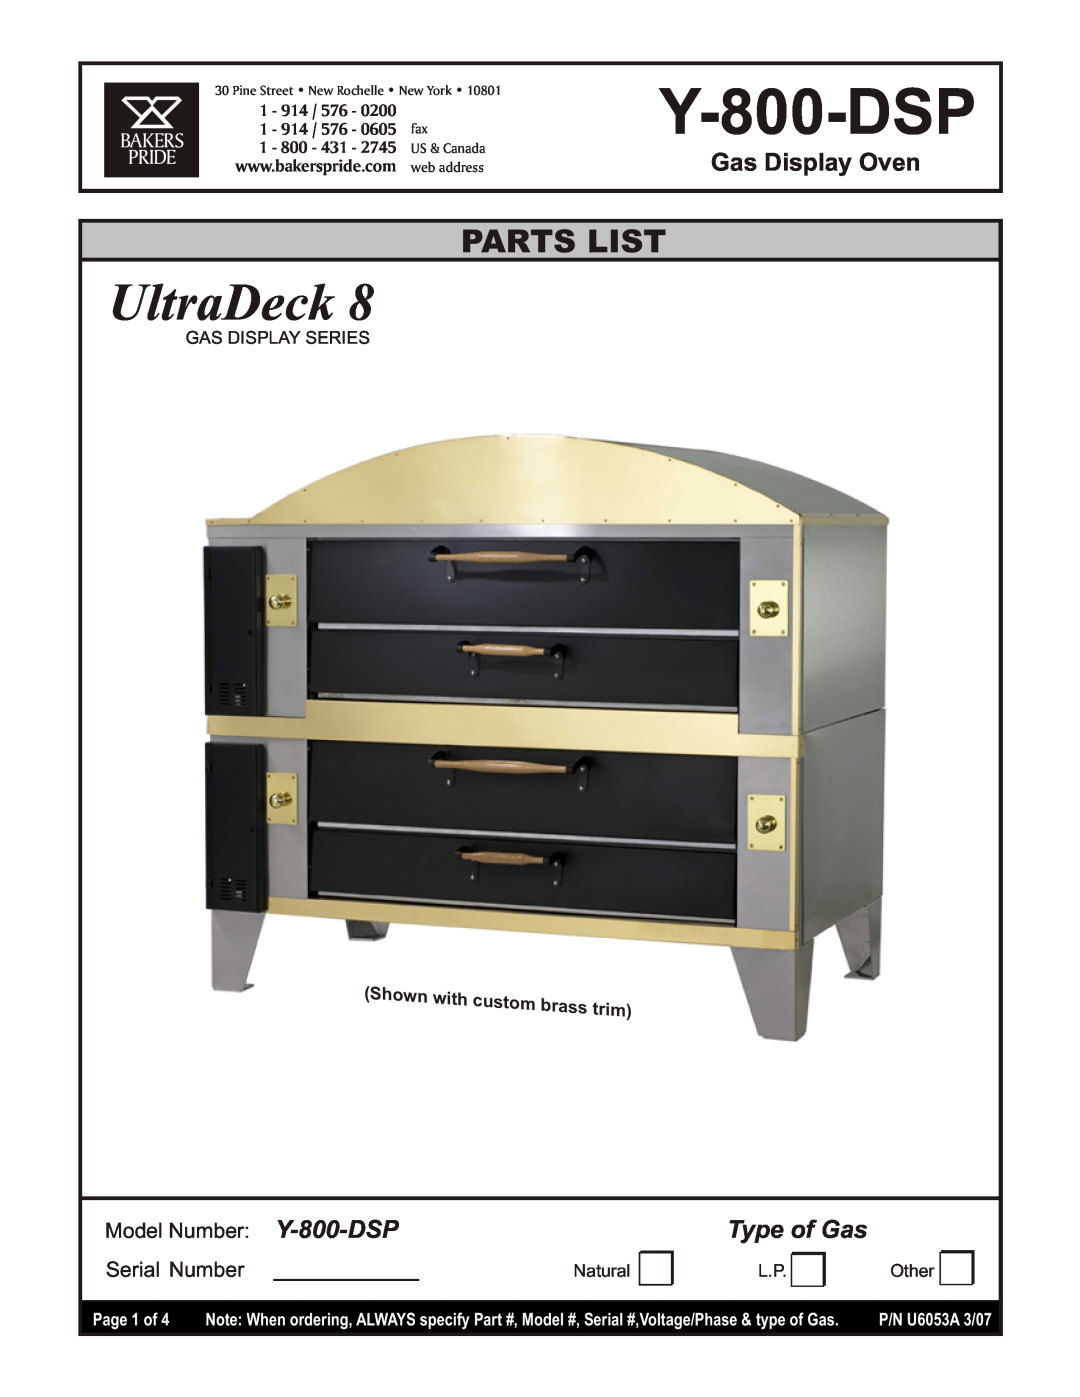 Bakers Pride Oven Y-800-DSP manual Page 1 of, UltraDeck, Parts List, Gas Display Oven, Type of Gas, 1 - 914, 1 - 800 - 431 